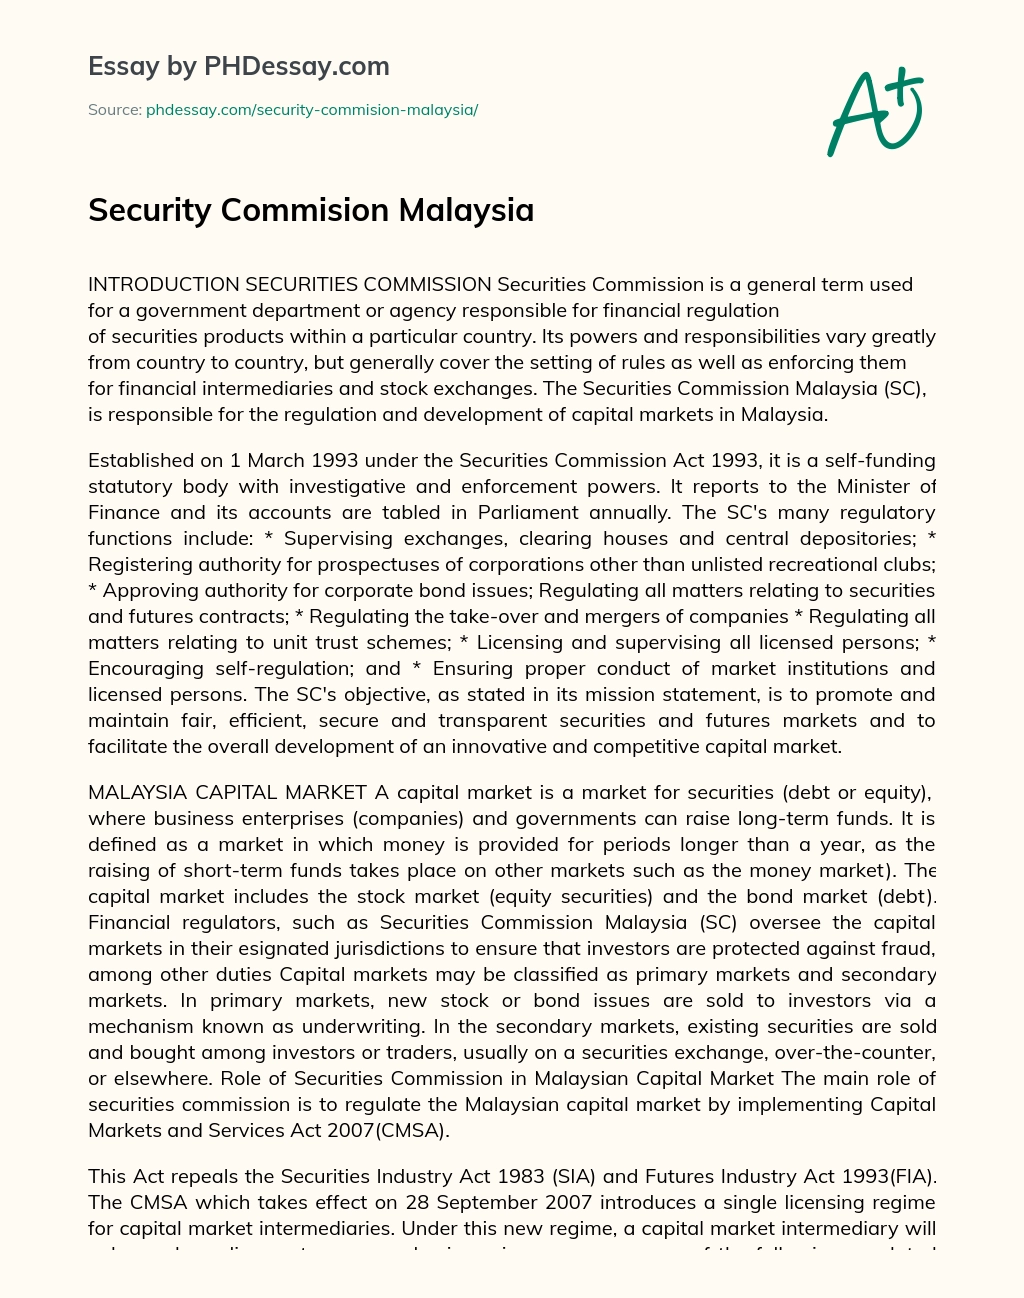 Security Commision Malaysia essay